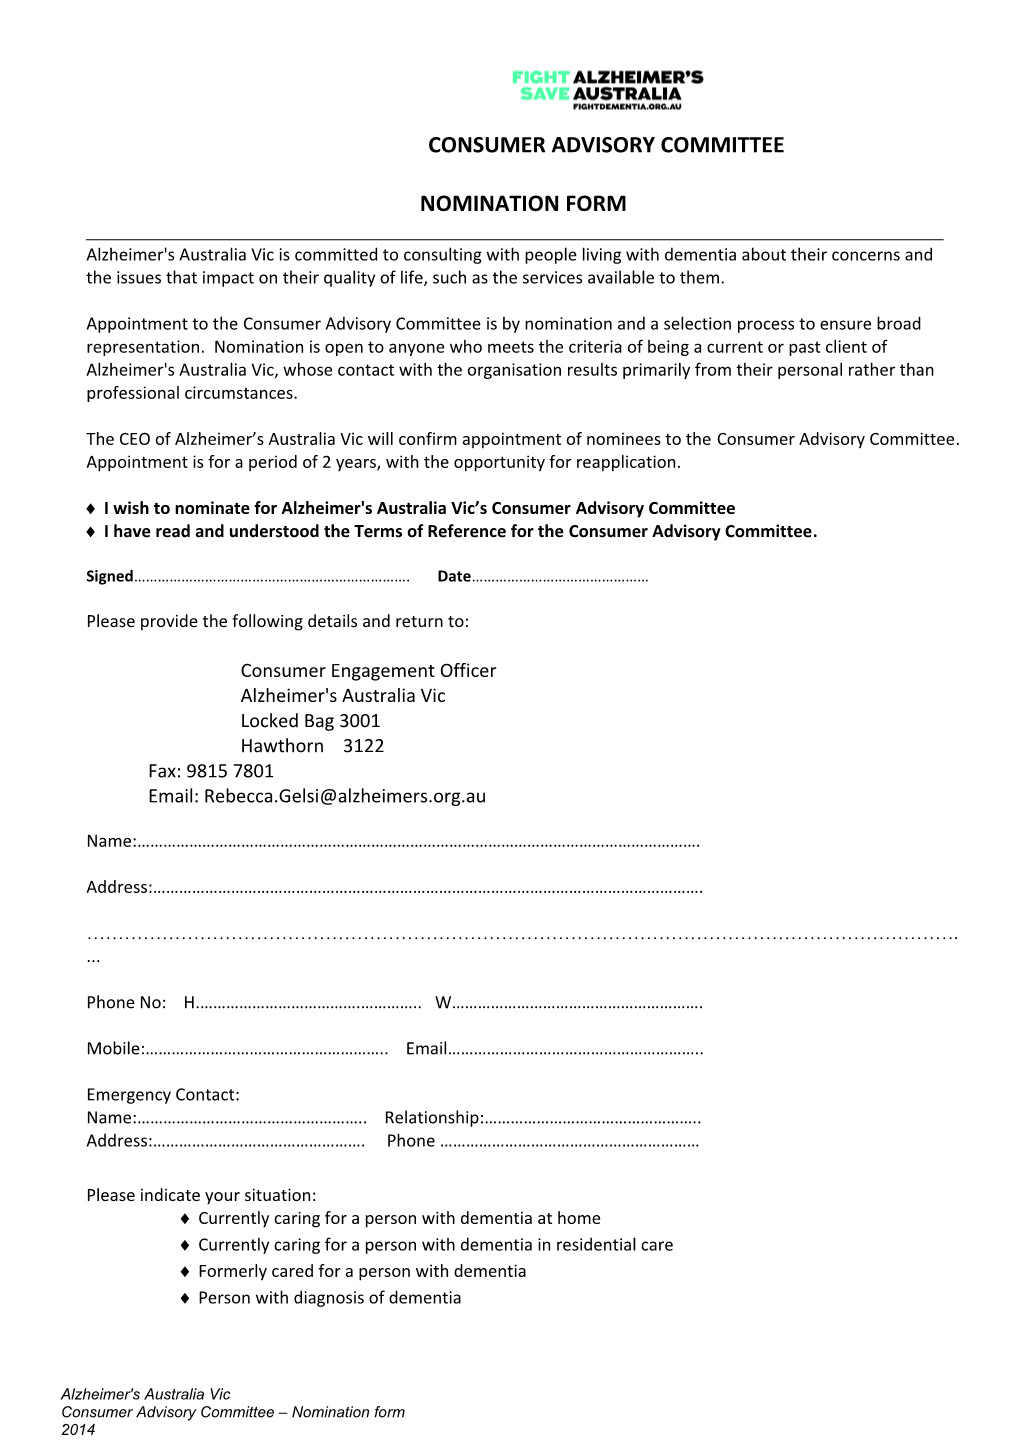 Consumer Advisory Committee Nomination Form